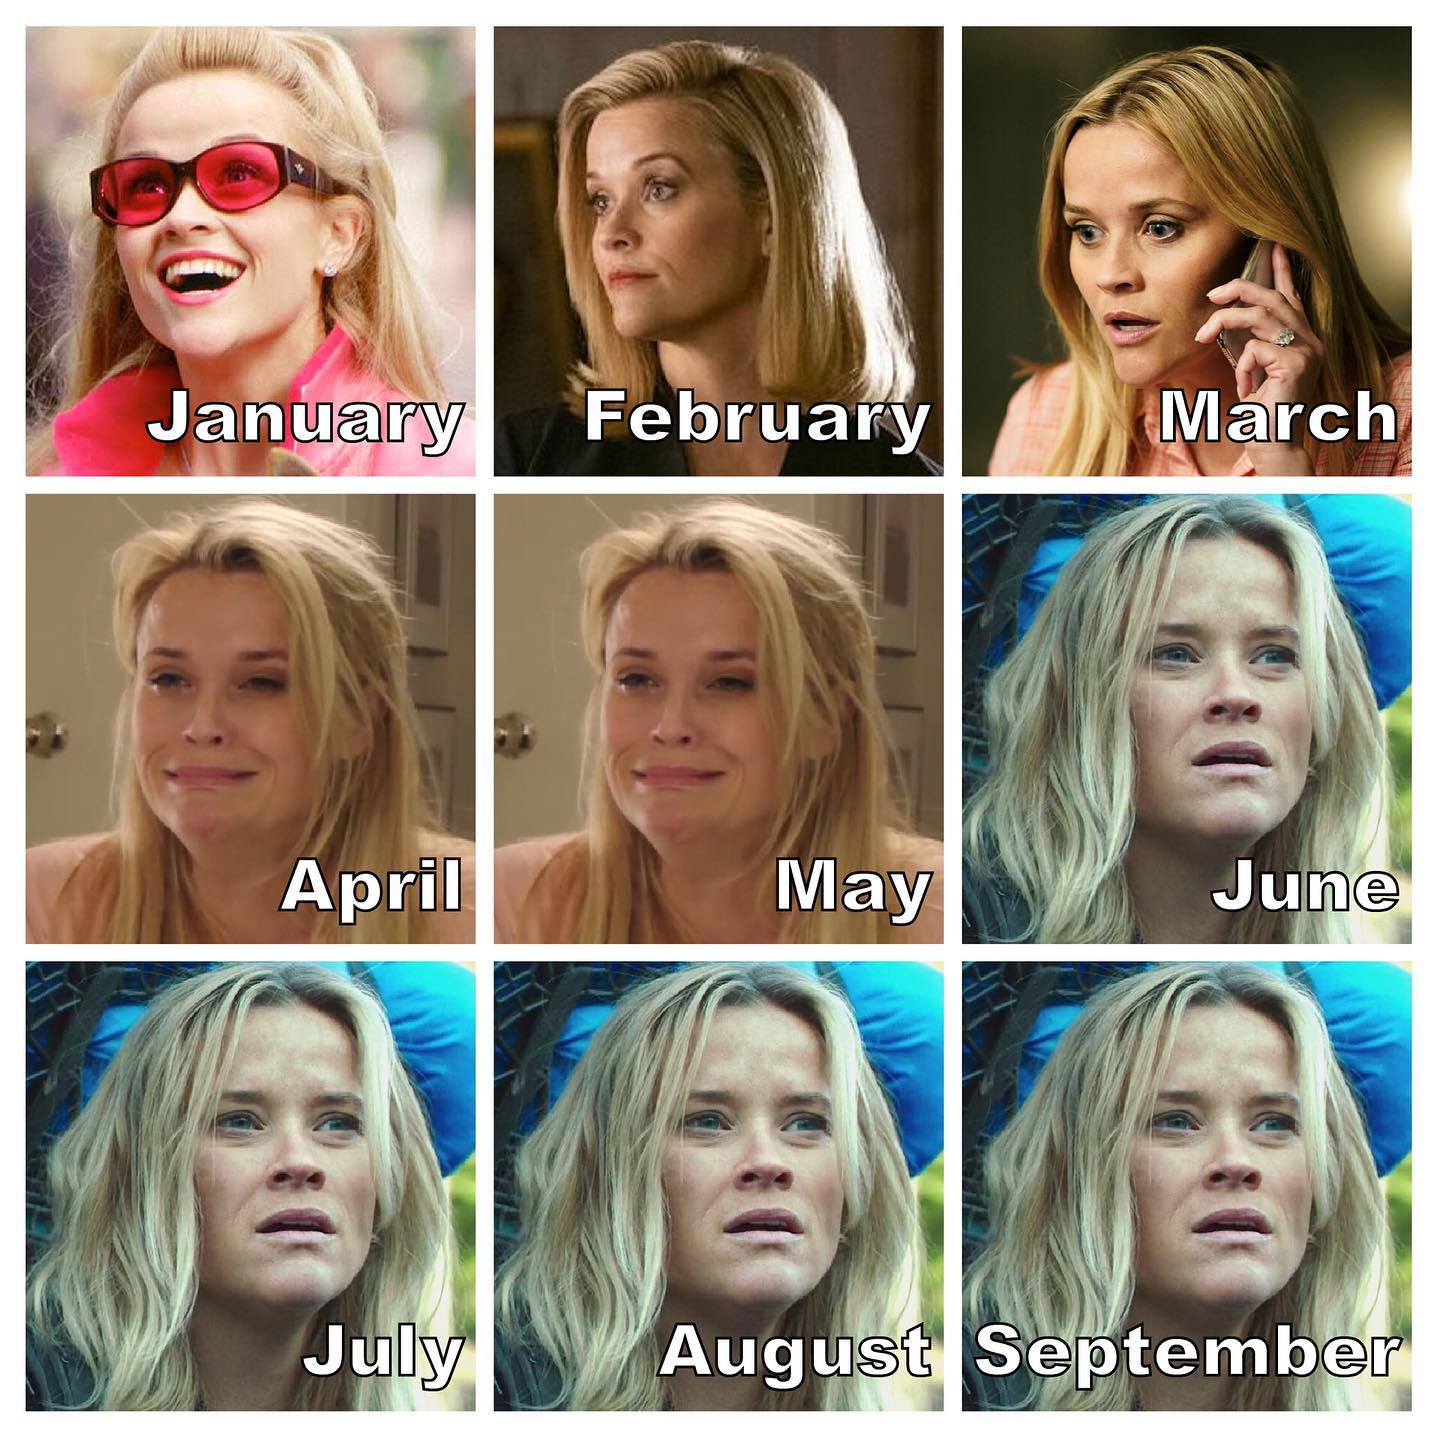 2020 challenge - reese witherspoon -March/April - January February March April May June July August September